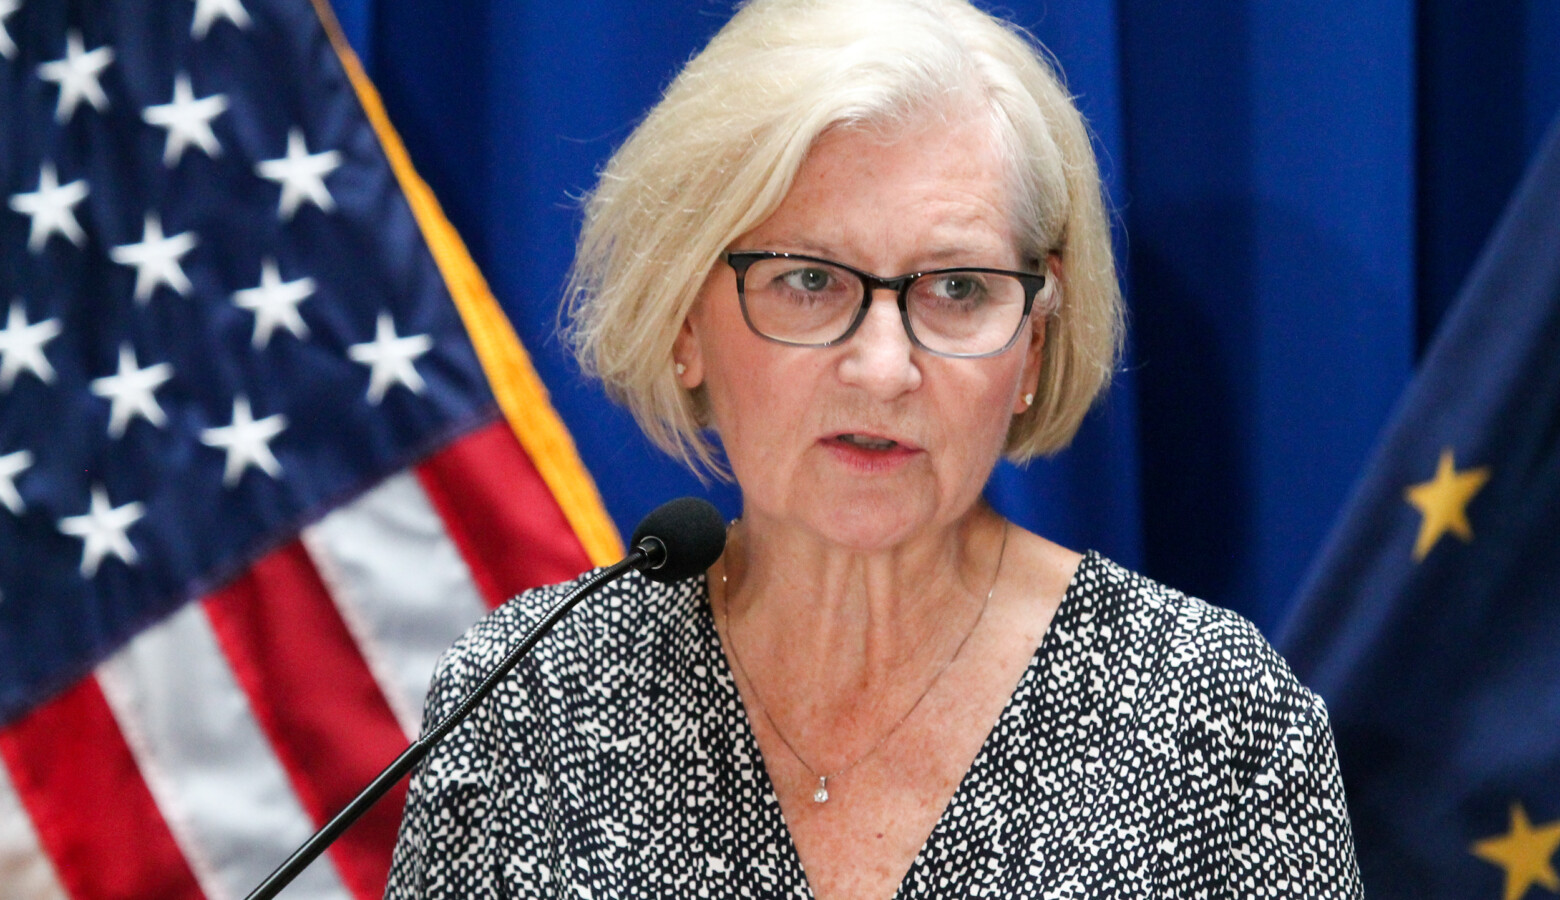 State Health Commissioner Dr. Kris Box says the state has struggled with resources to do enough COVID-19 tests, though it’s increasing its capacity. (Lauren Chapman/IPB News)